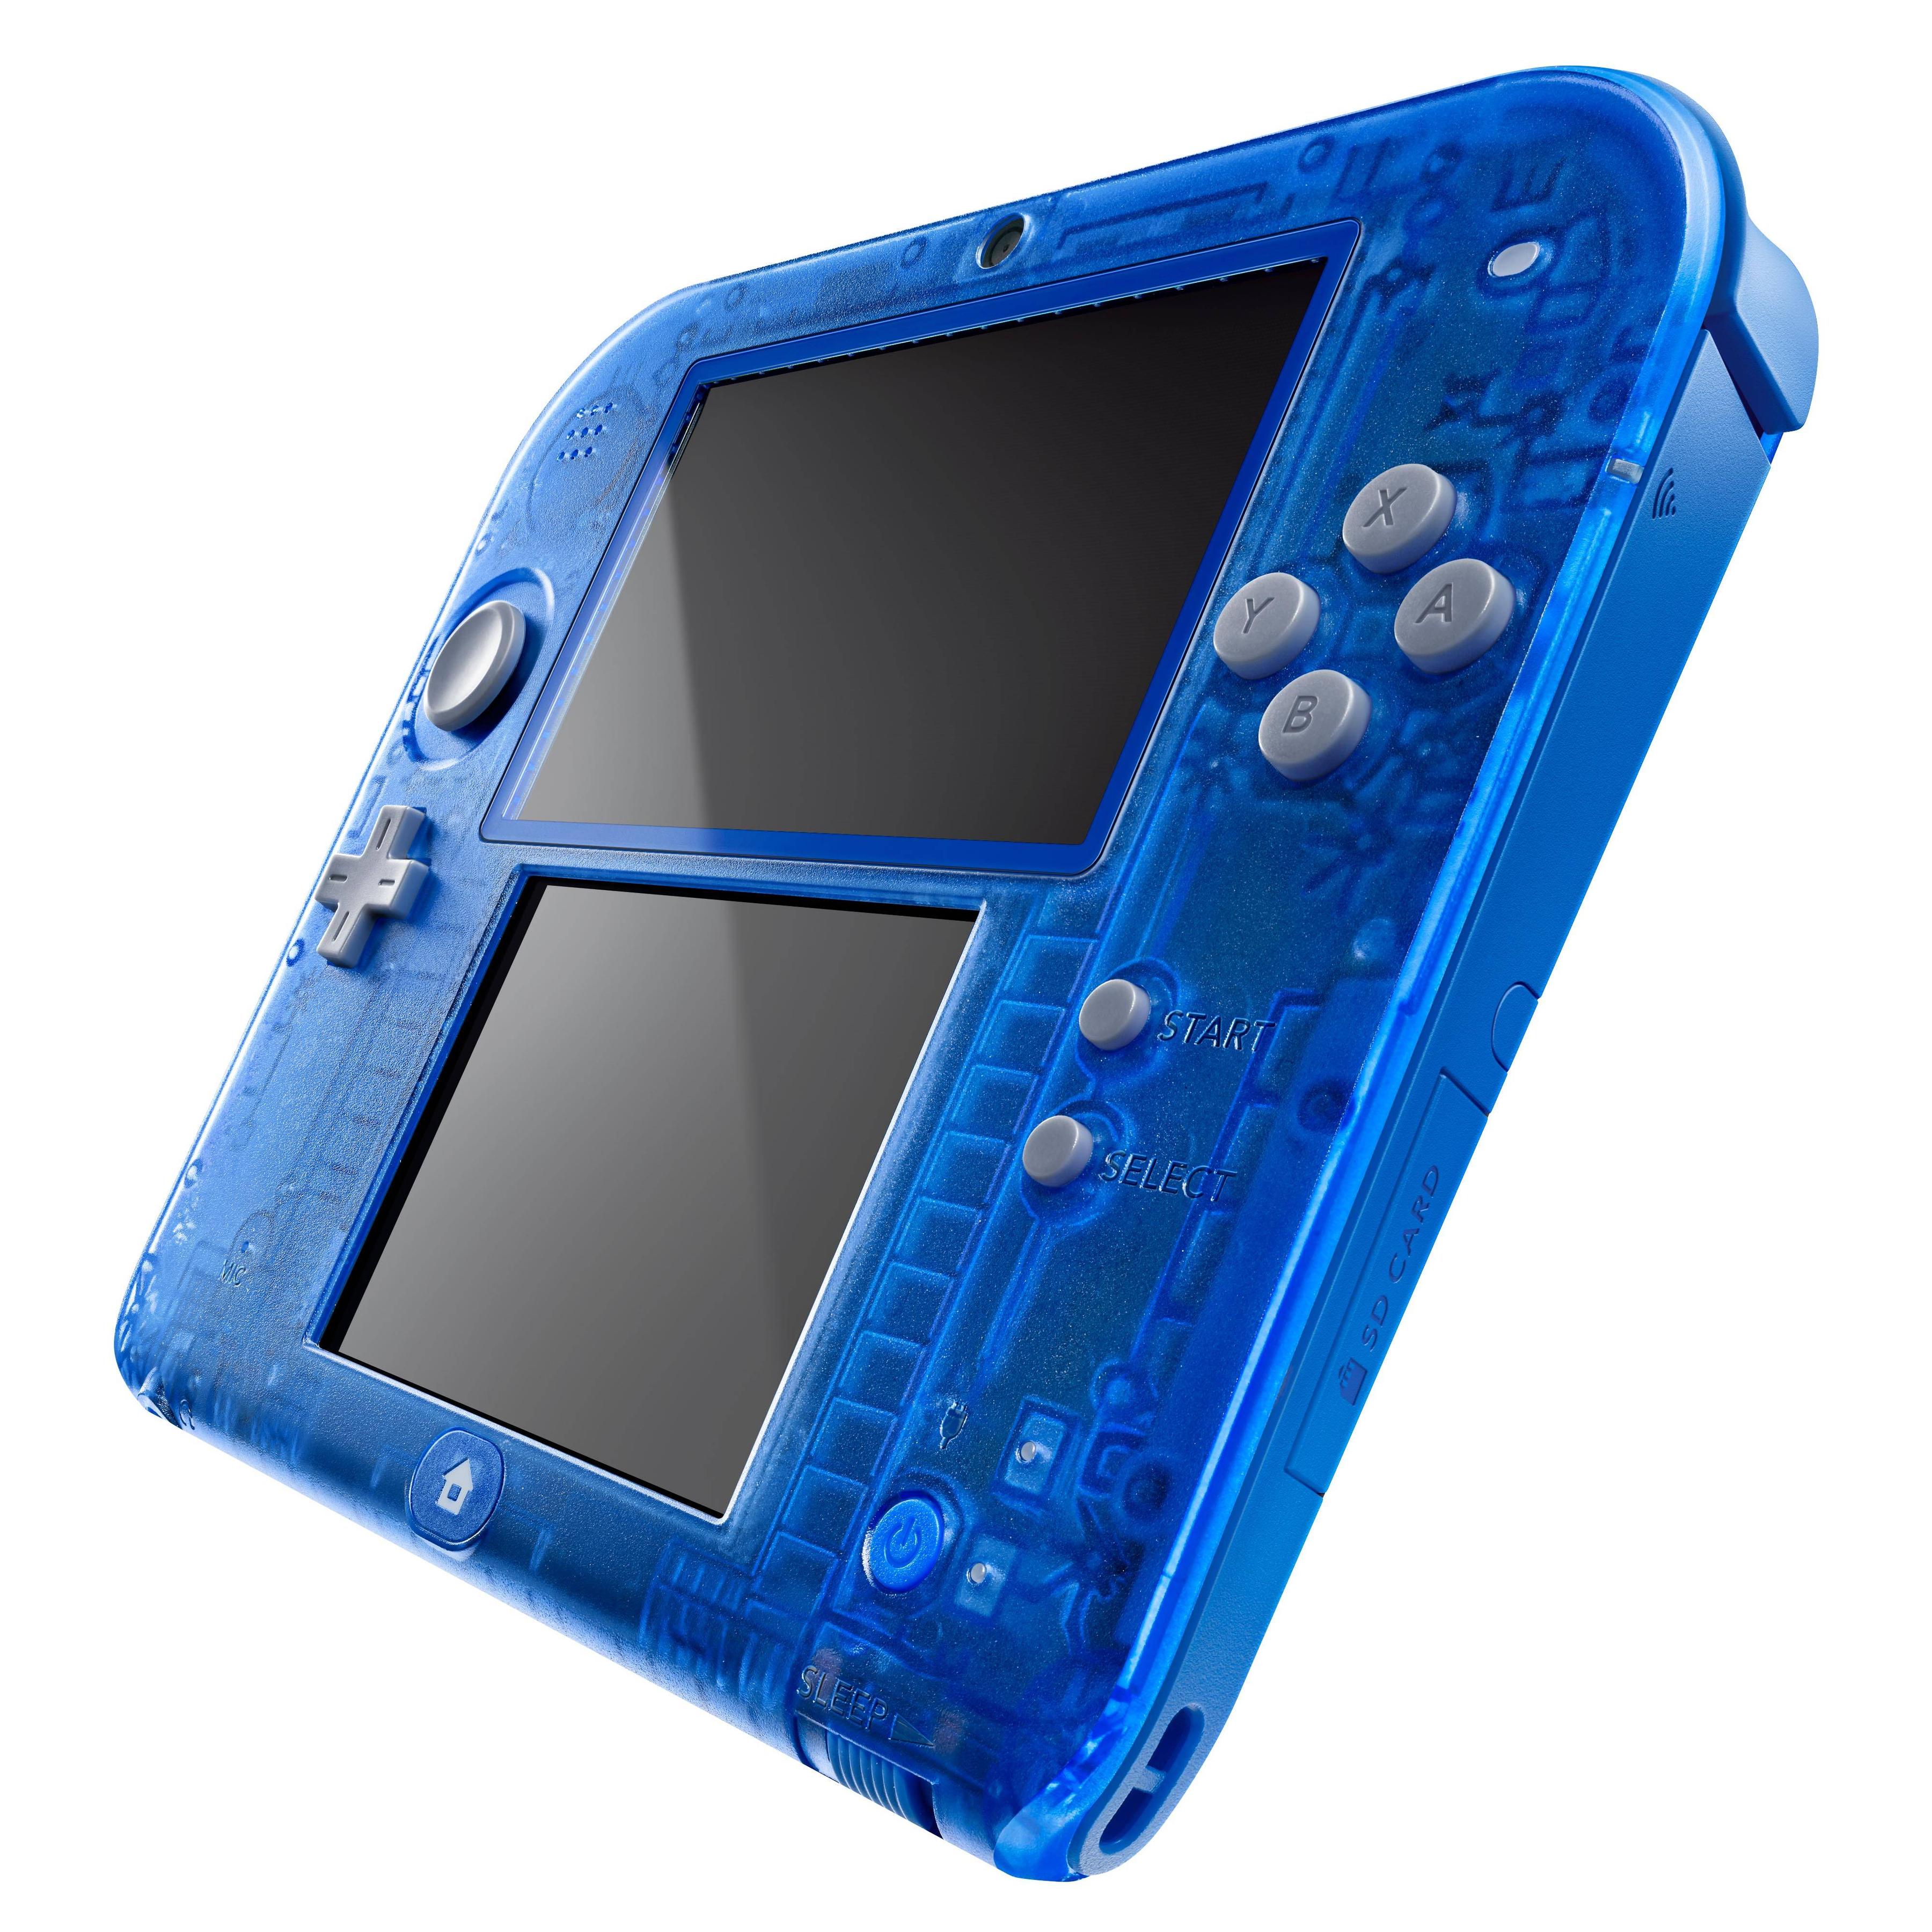 2ds clear shell